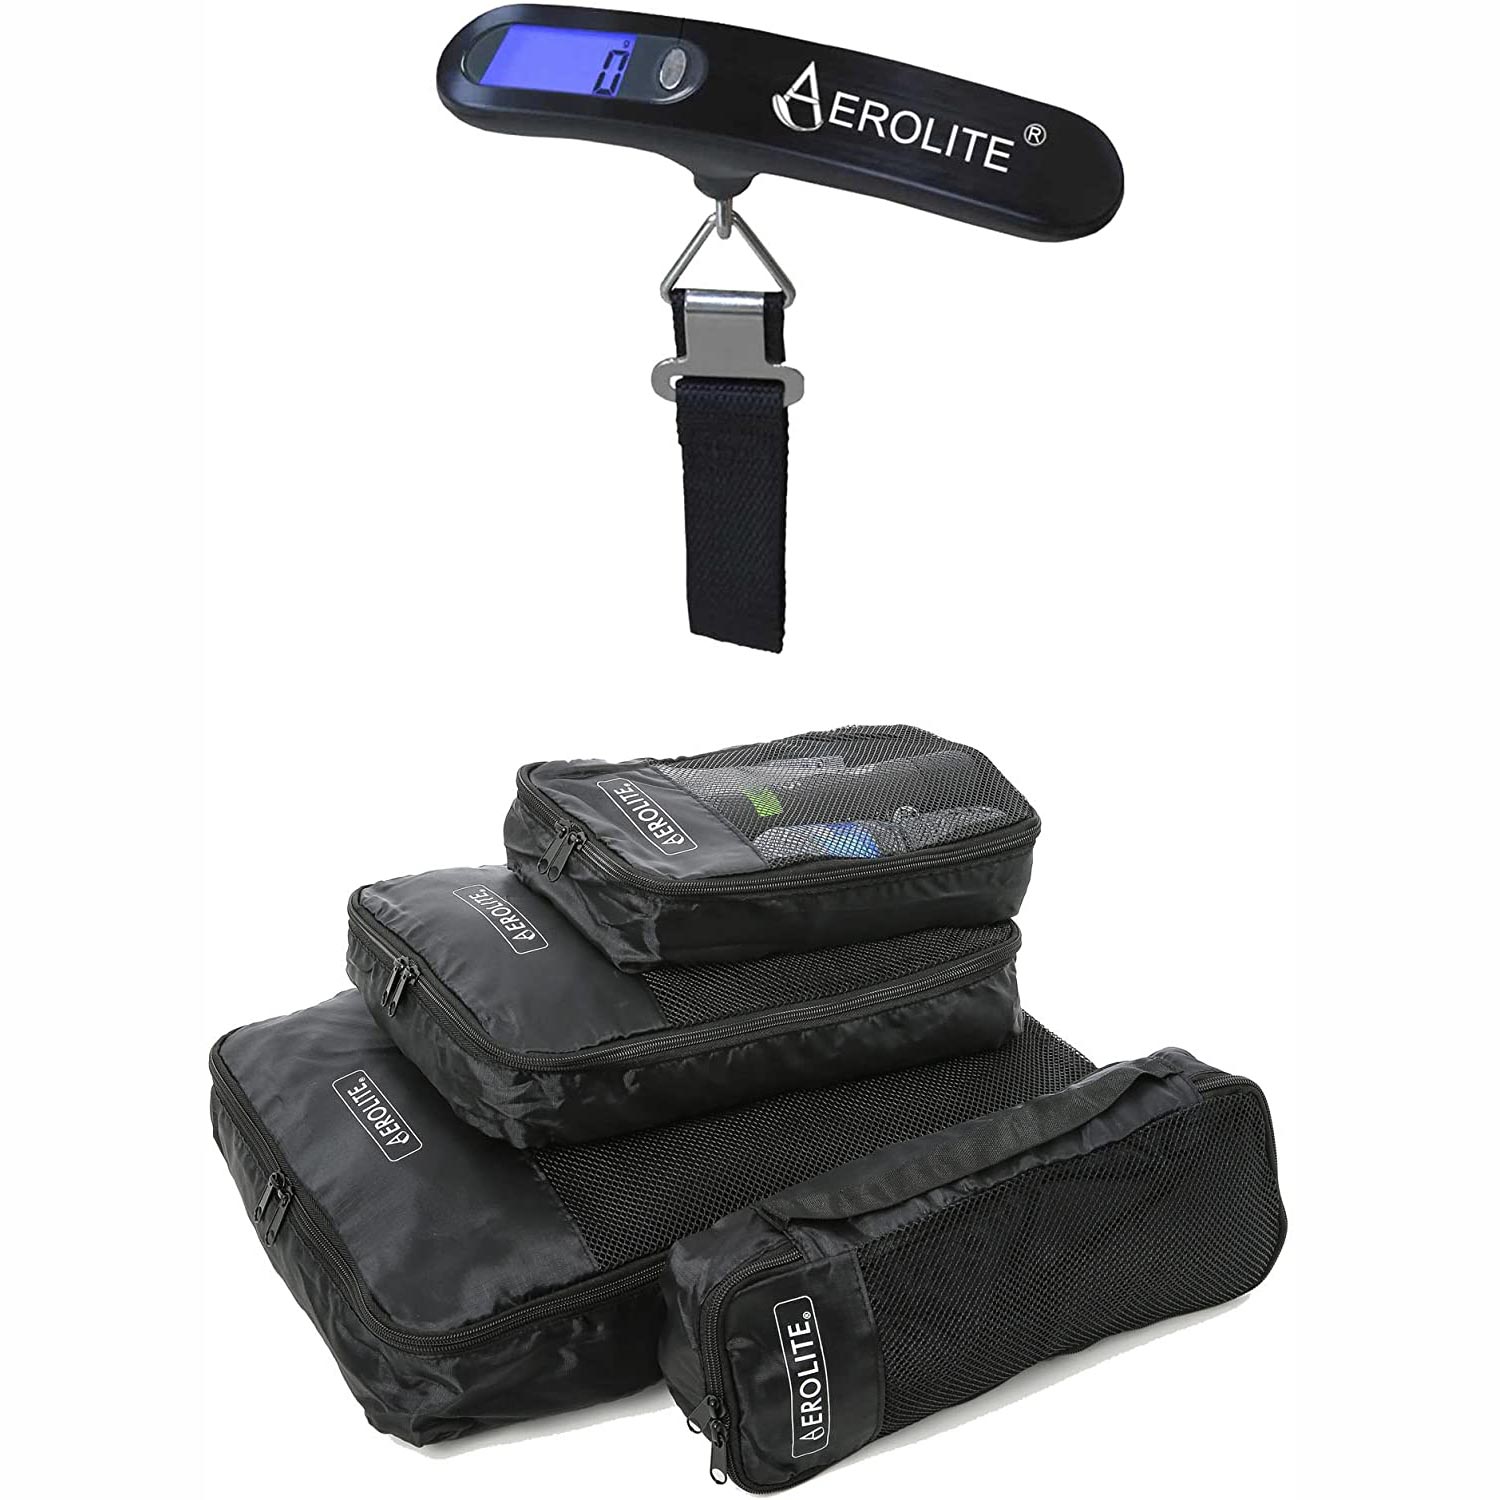 Aerolite Travel Accessories Bundle: Luggage Scales & 4 Piece Packing Cubes